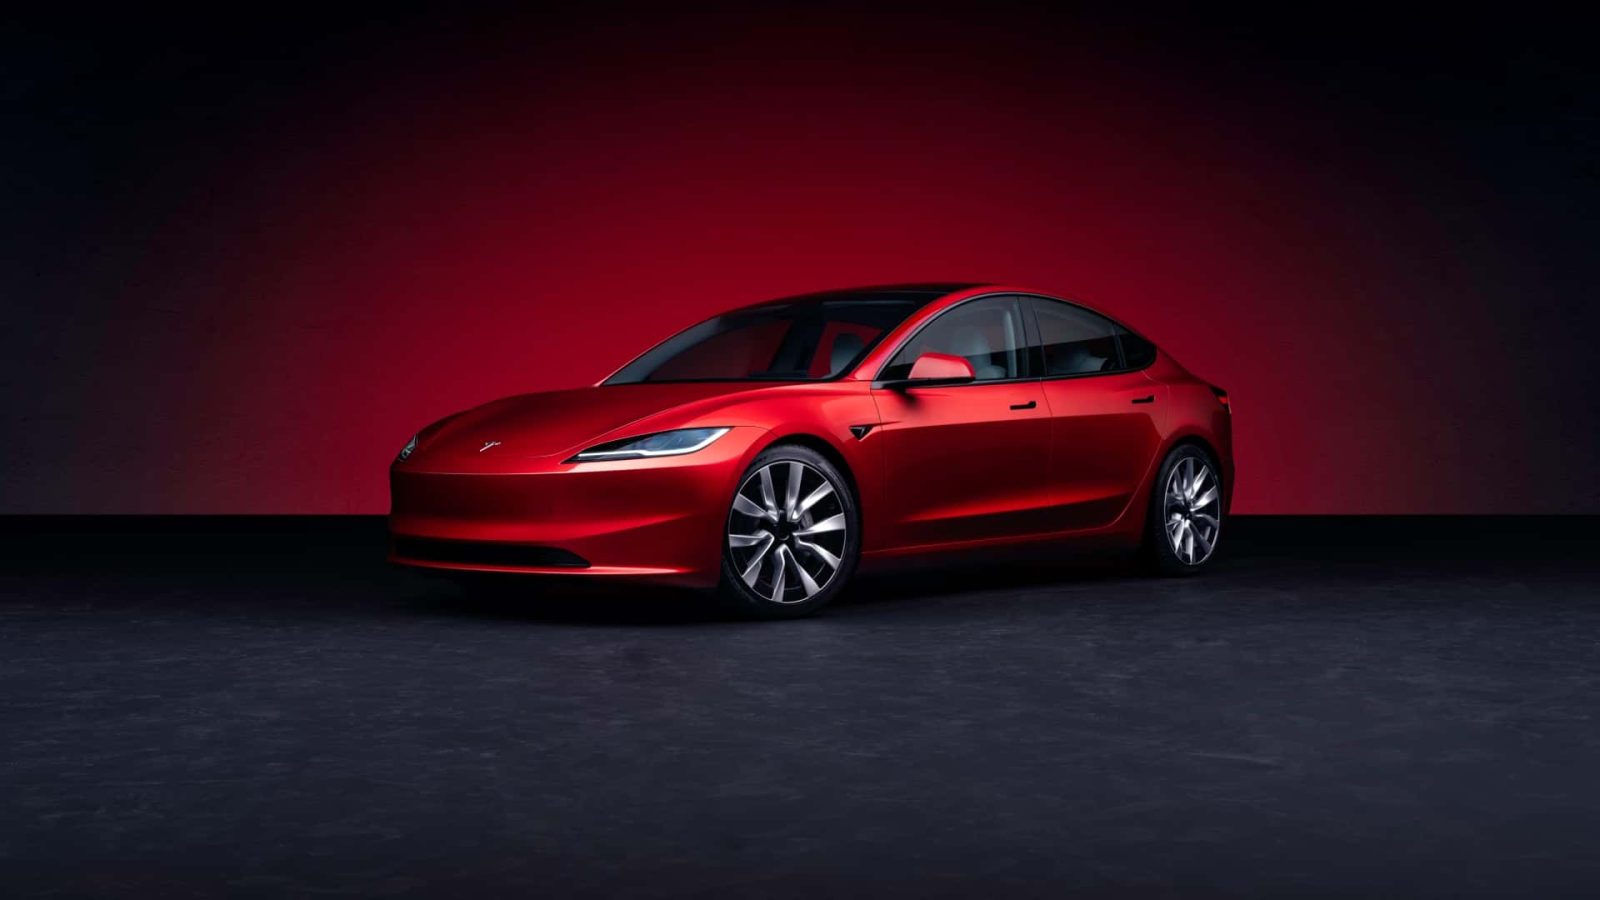 wp-content/uploads/sites/6/2023/09/updated-tesla-model-3-front-three-quarters-1.jpg?quality=82&strip=all&w=1600